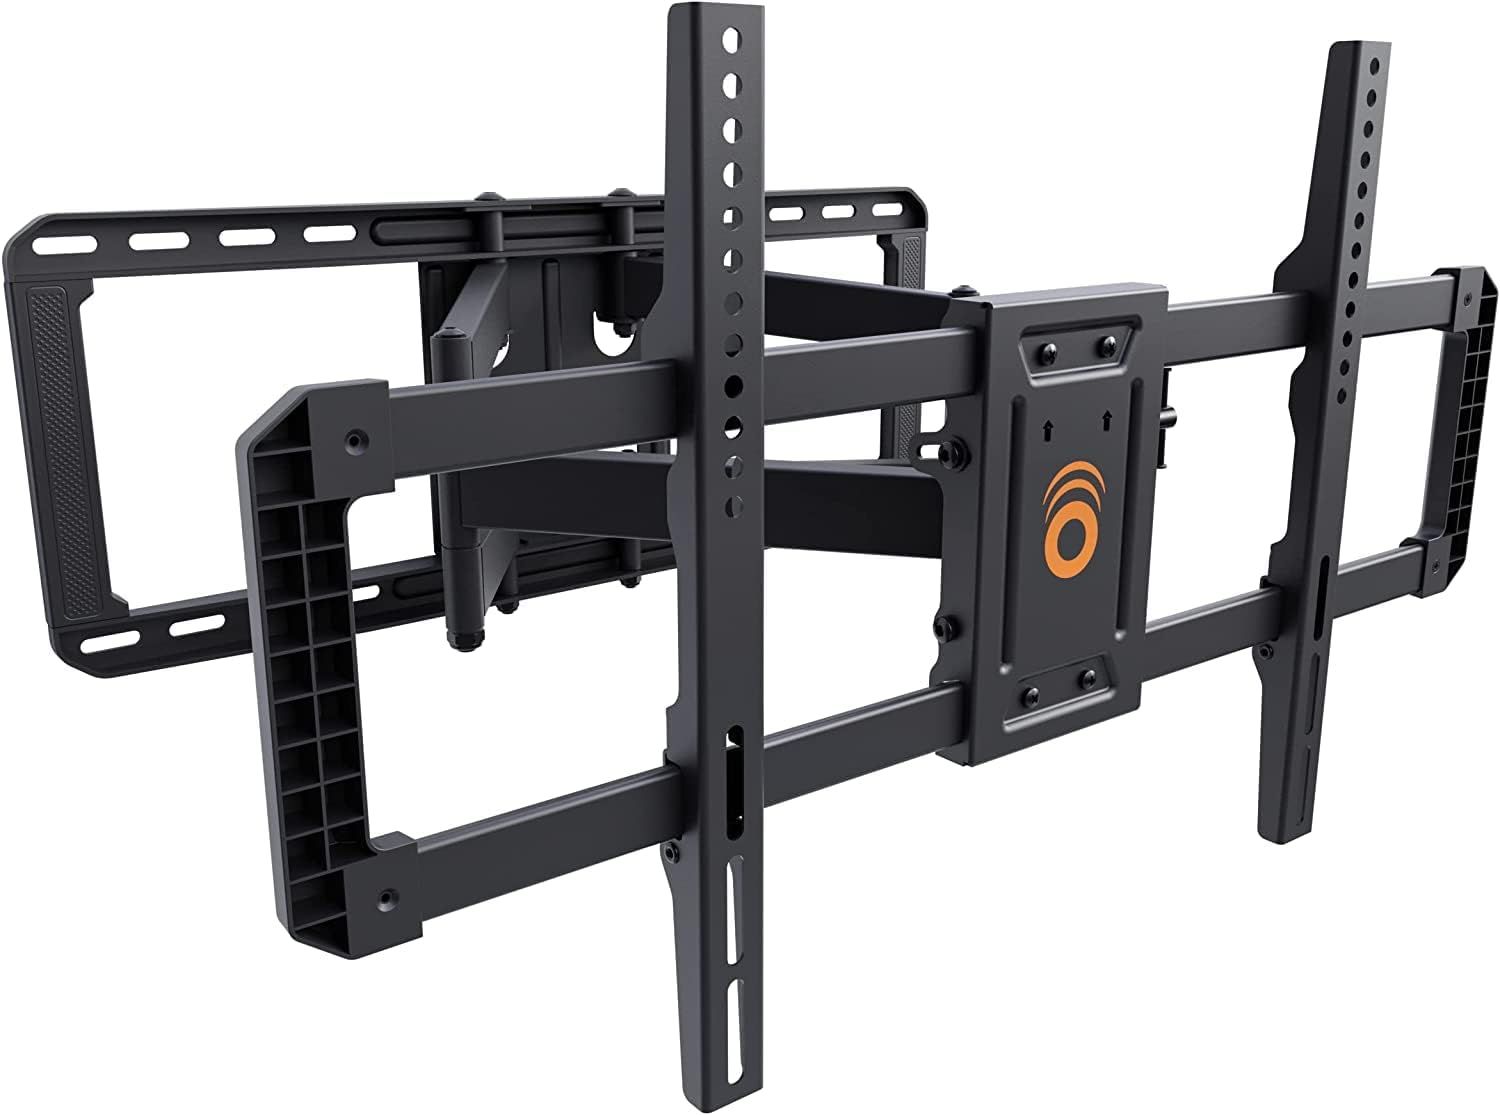 ECHOGEAR MaxMotion TV Wall Mount for Large TVs Up to 90”